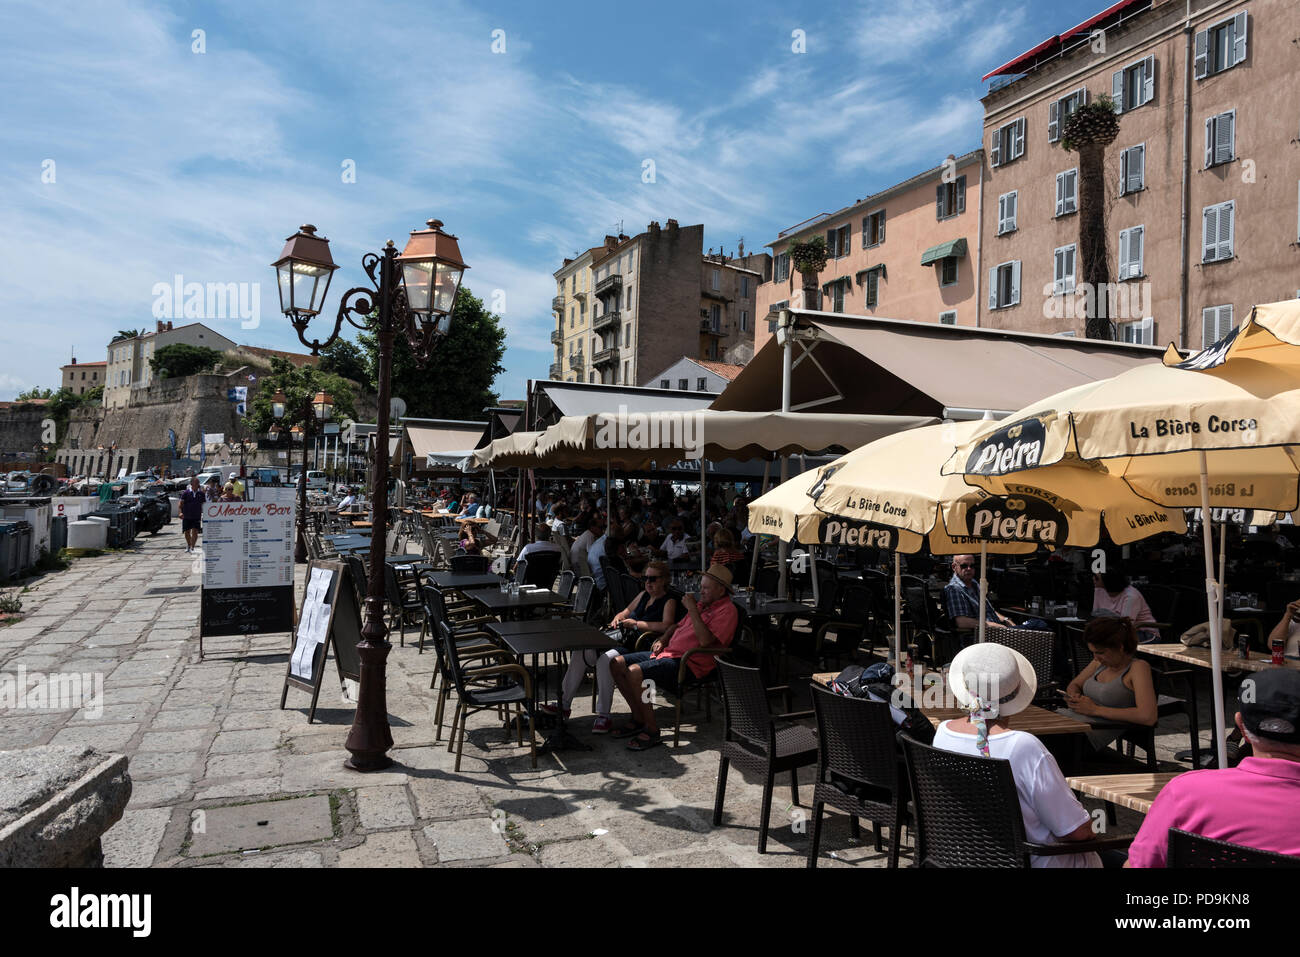 A row of restaurants along the Tino Rossi marina in the old Genoese  quarter of Ajaccio on Corsica, France Stock Photo